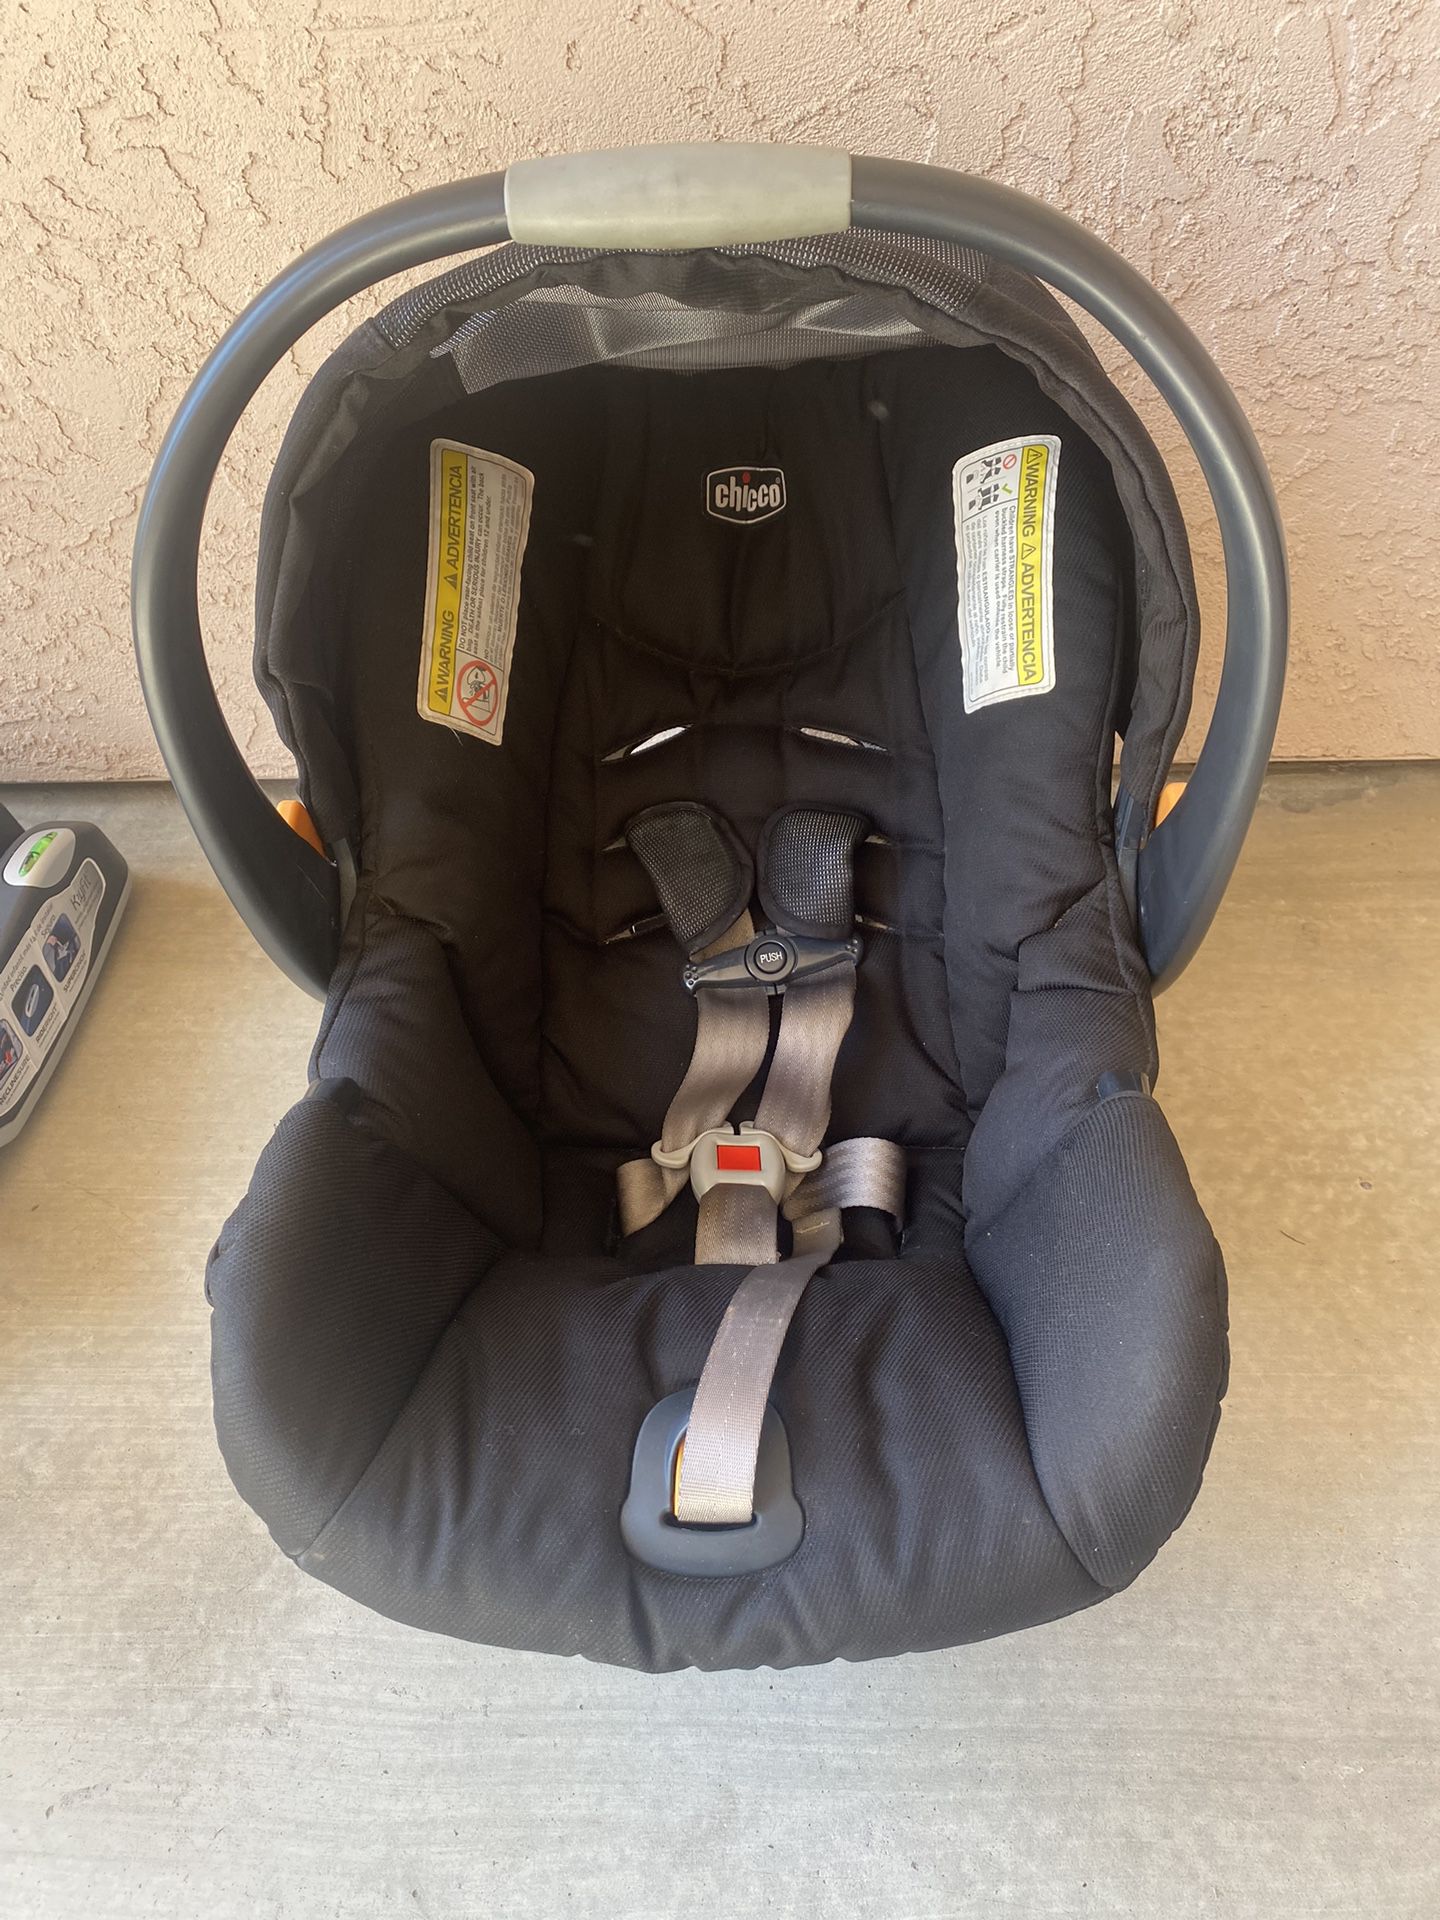 Chicco KeyFit Baby Car Seat 